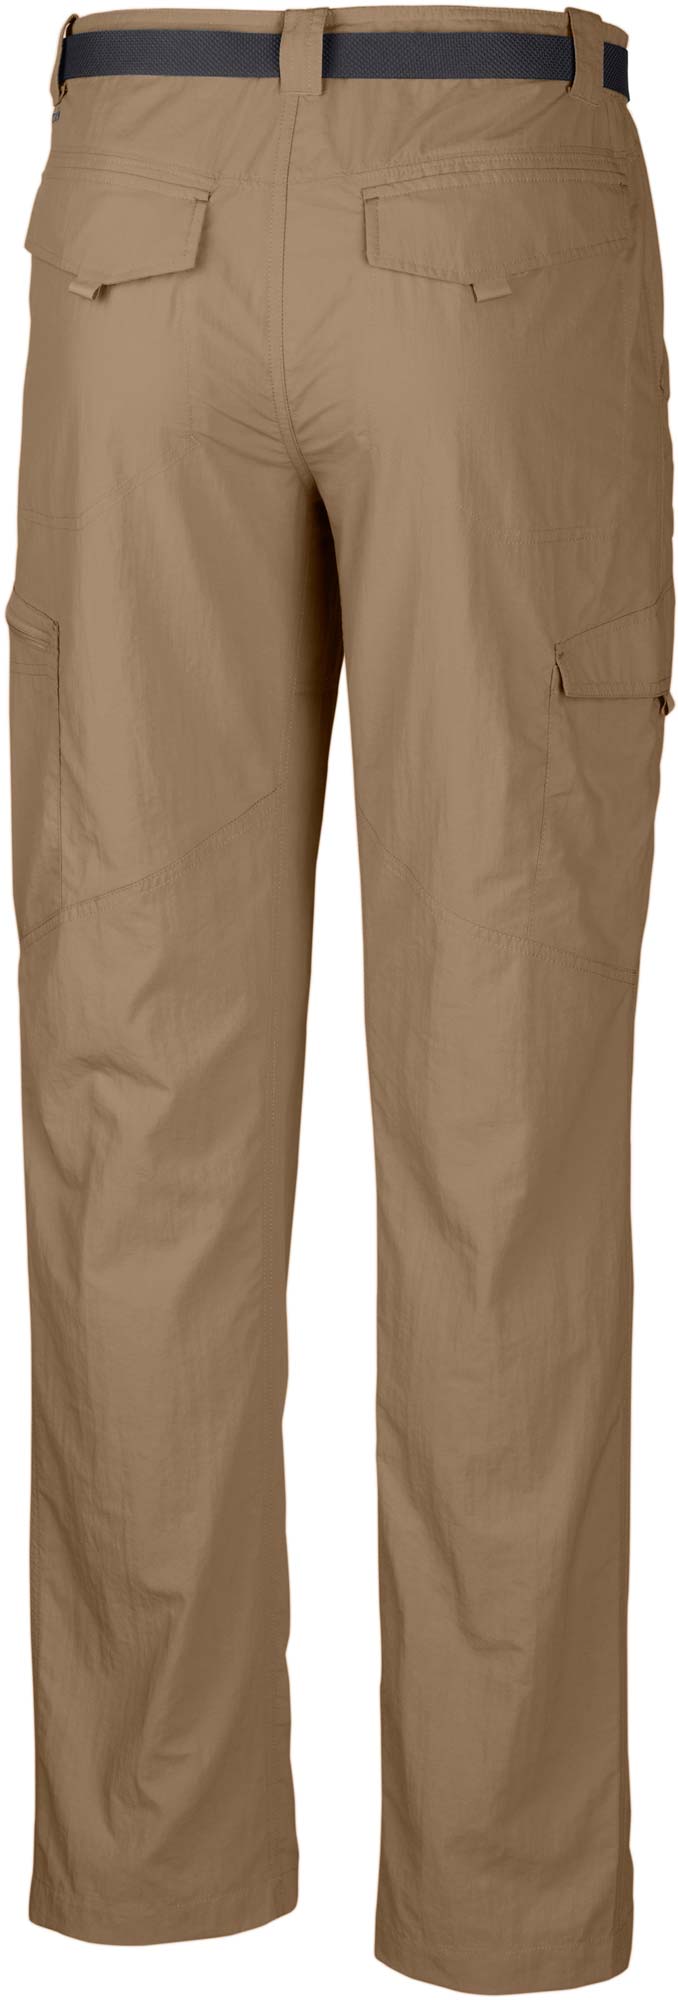 Men's trousers with side pockets